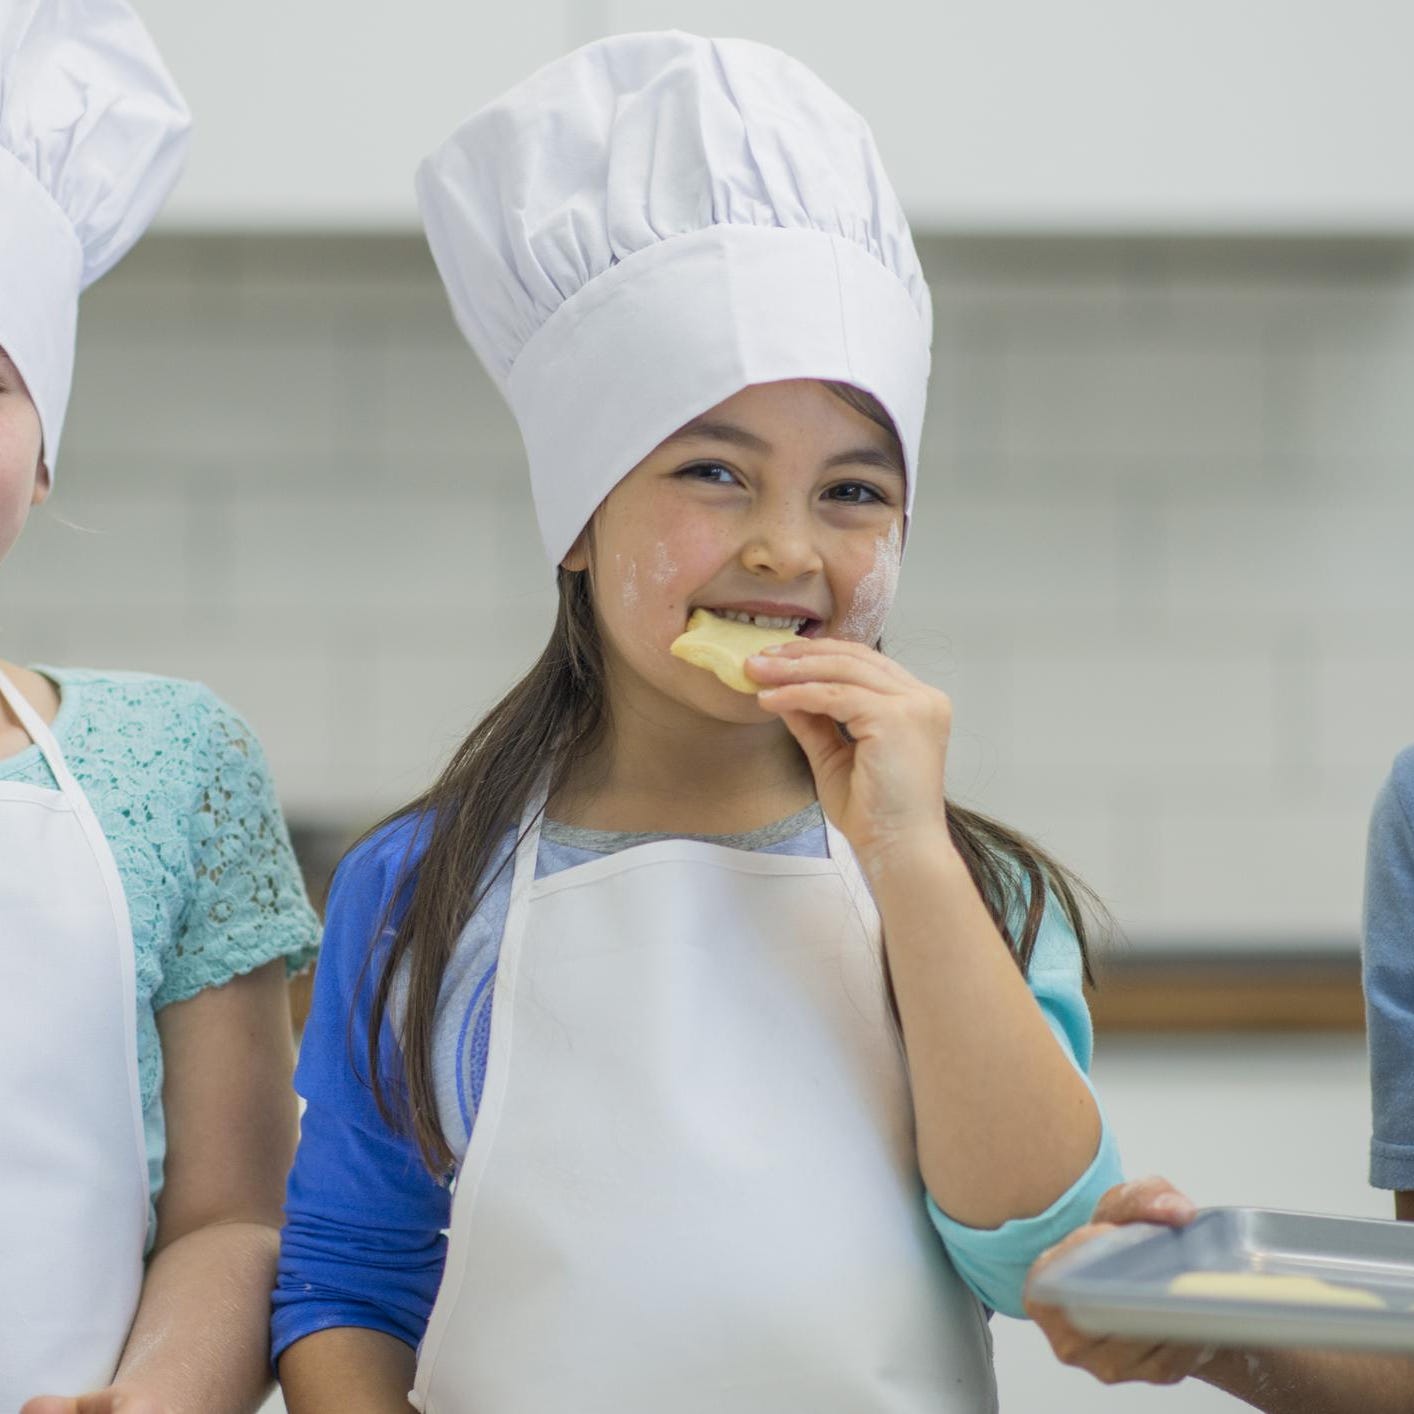 Cooking classes for kids are offered at the GHS Family YMCA this month.